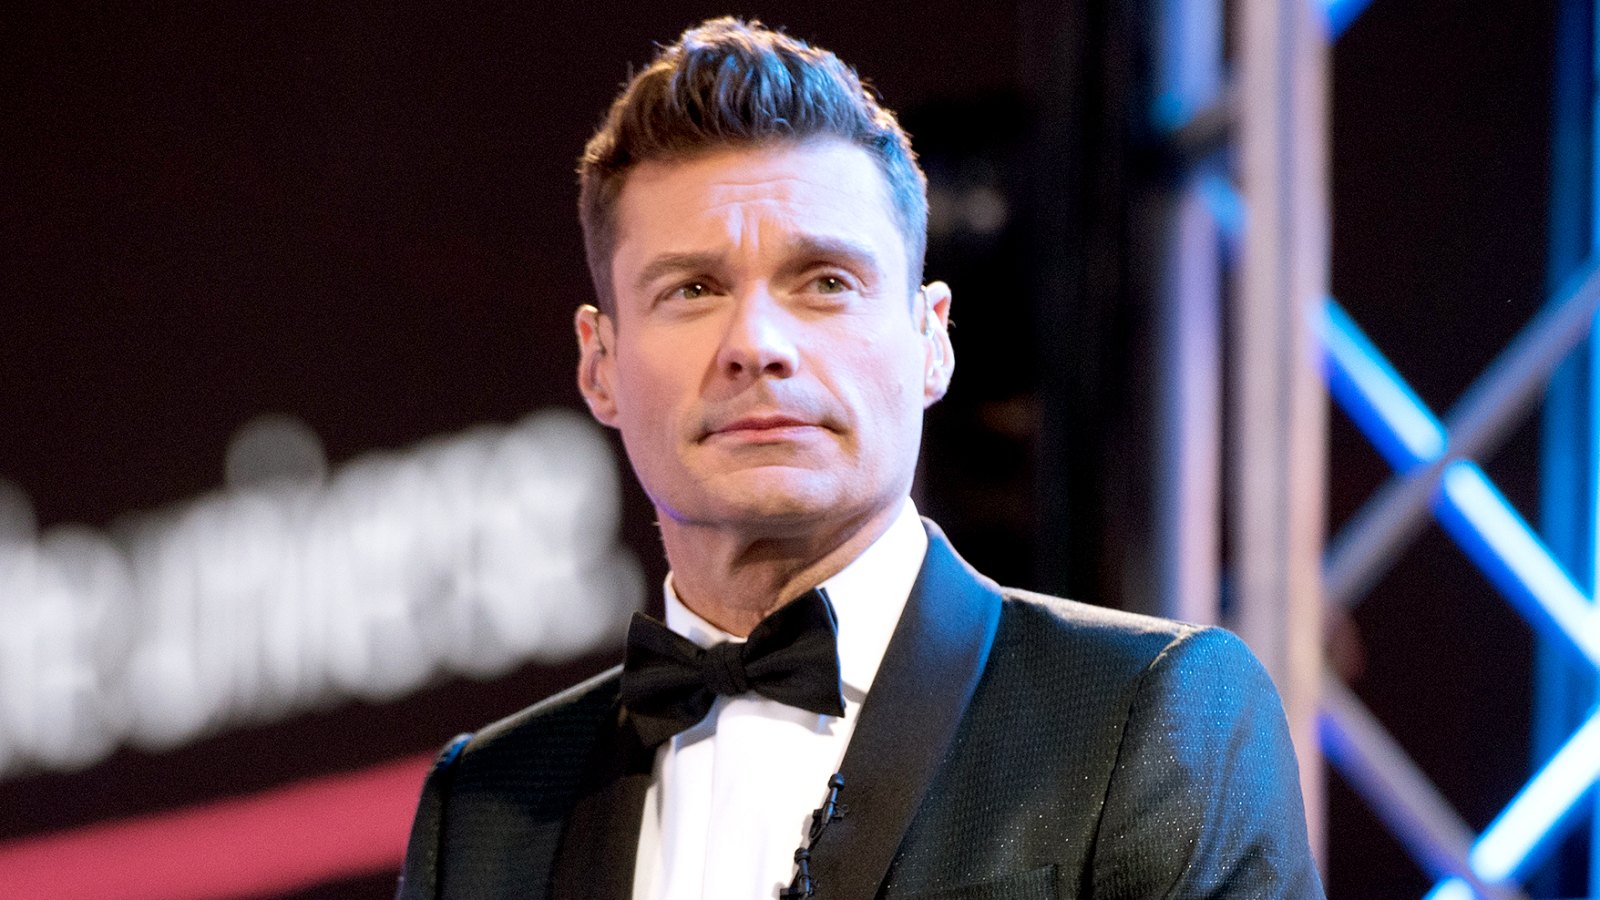 Ryan Seacrest hosts 'Dick Clark's New Year's Rockin' Eve' during New Year's Eve 2017 in Times Square on December 31, 2016 in New York City.